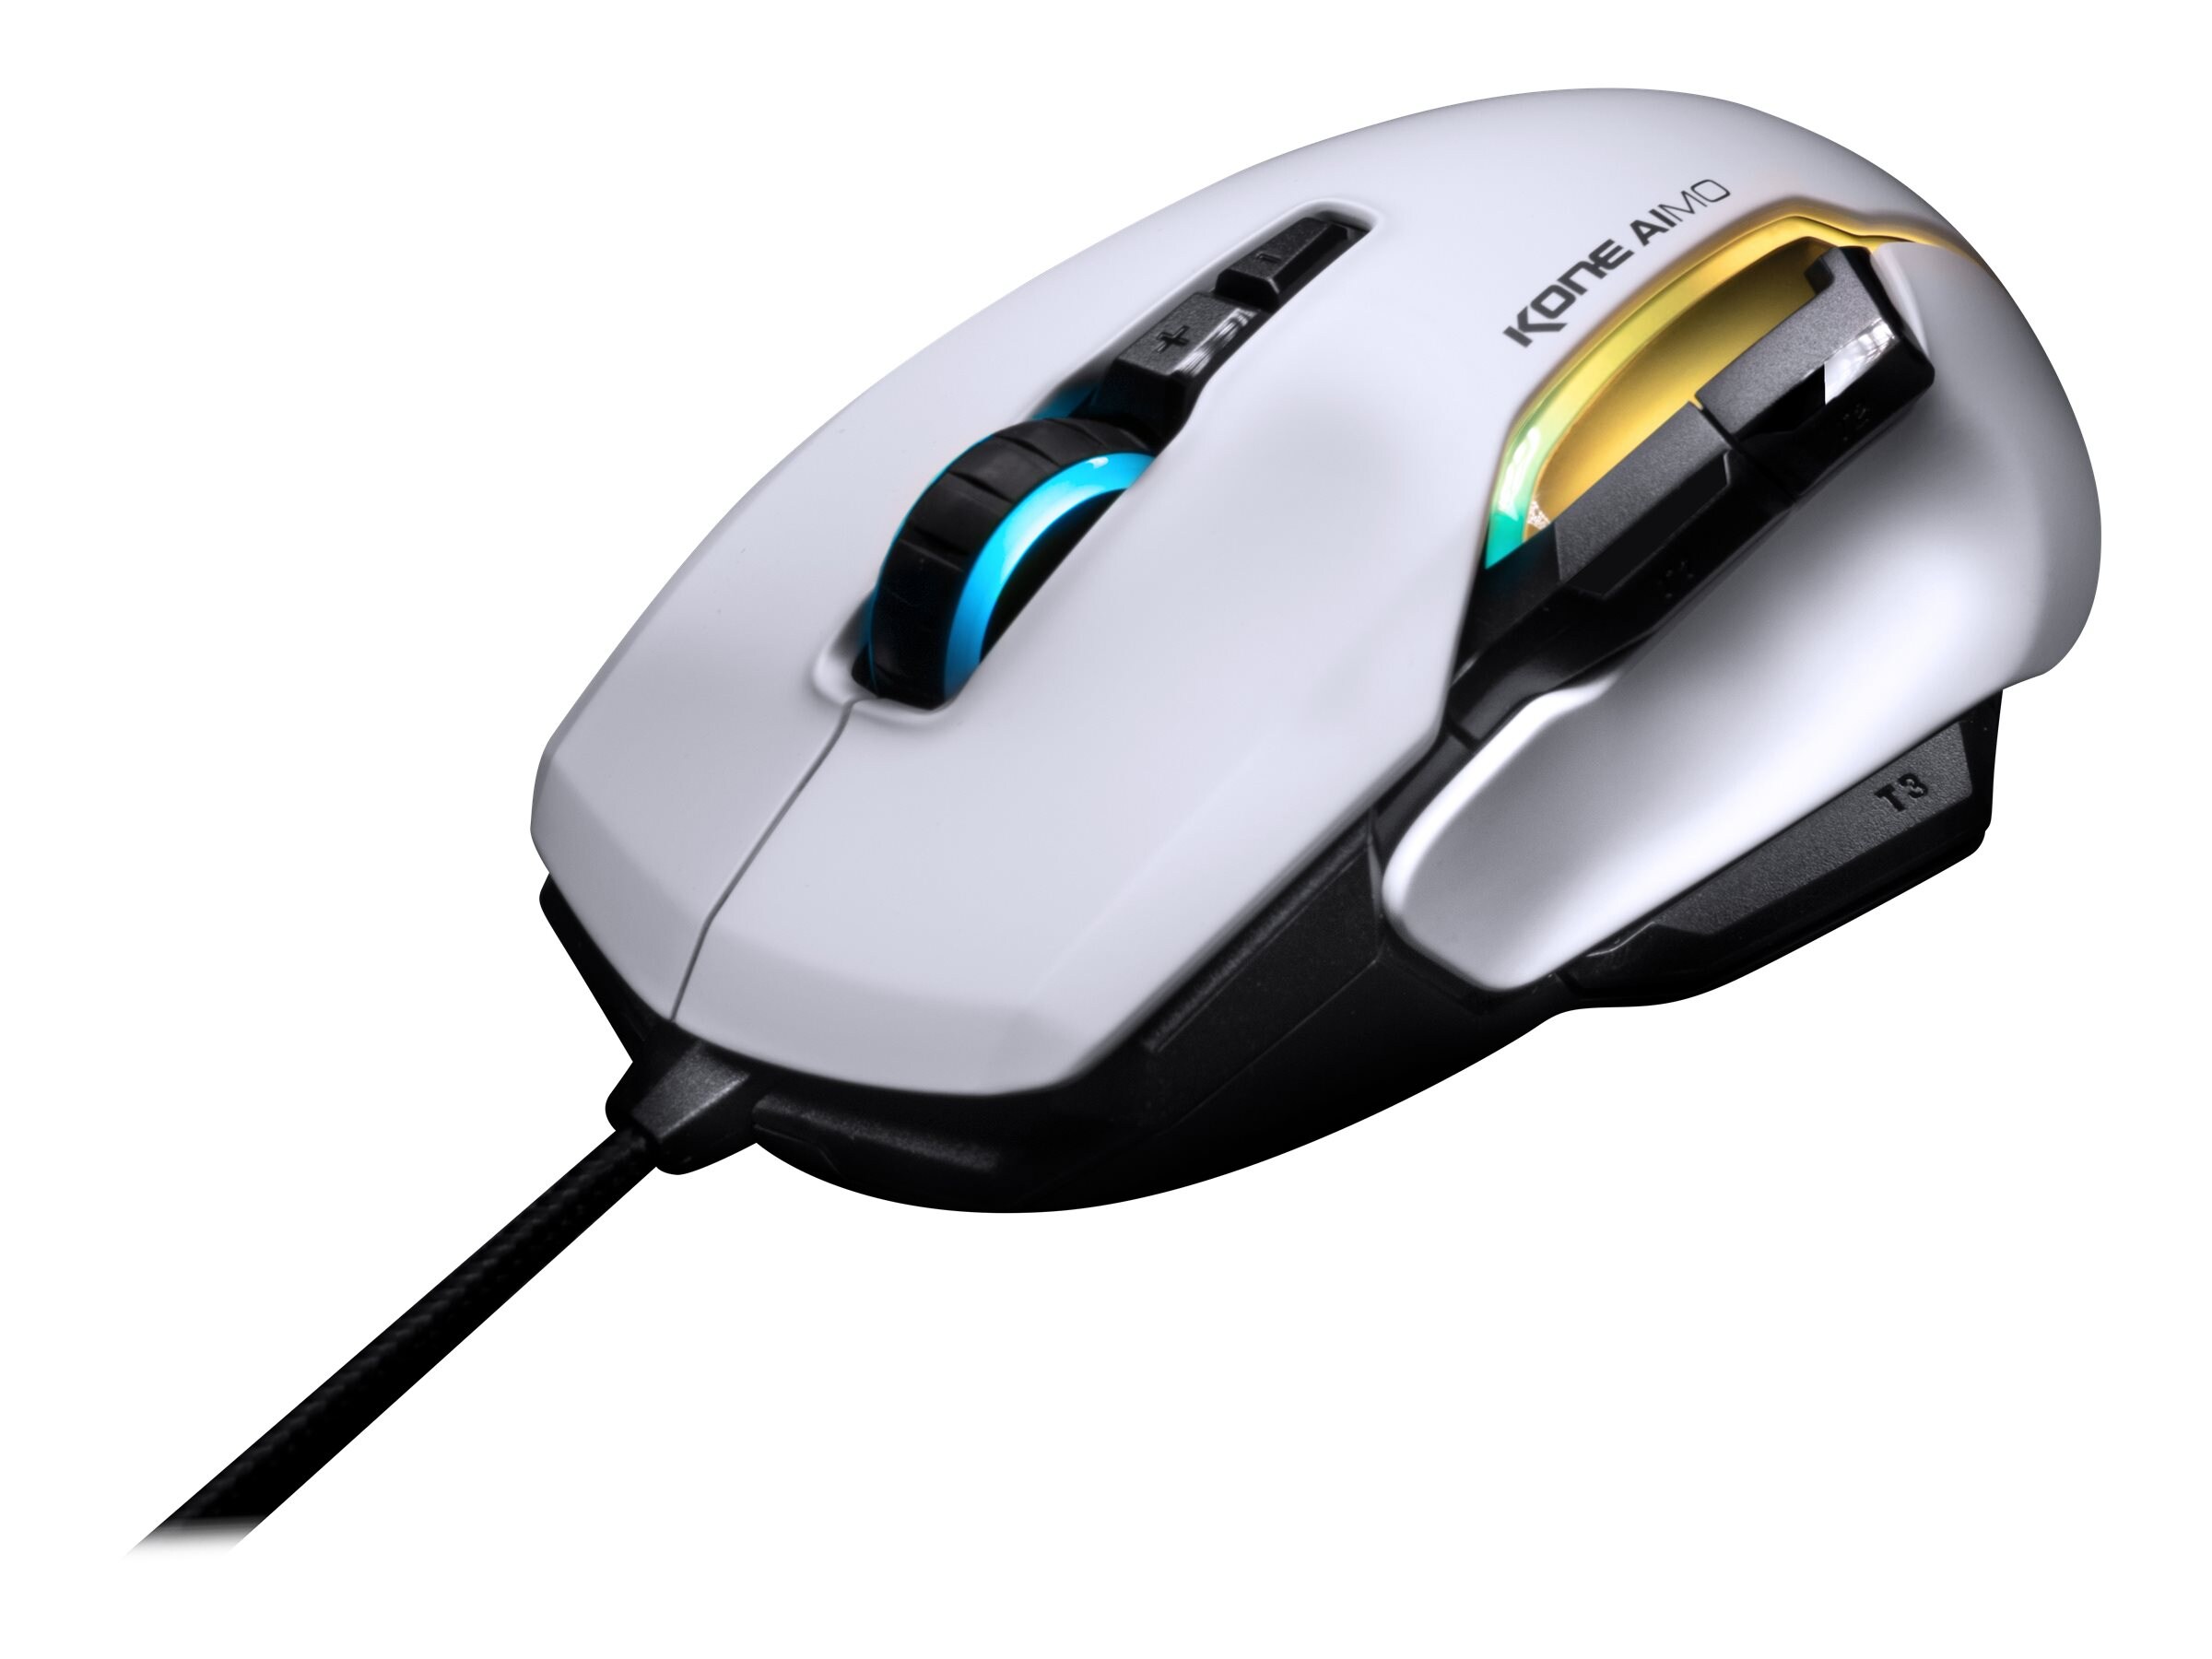 ROCCAT Kone AIMO remastered Gaming Maus weiss ++ Cyberport